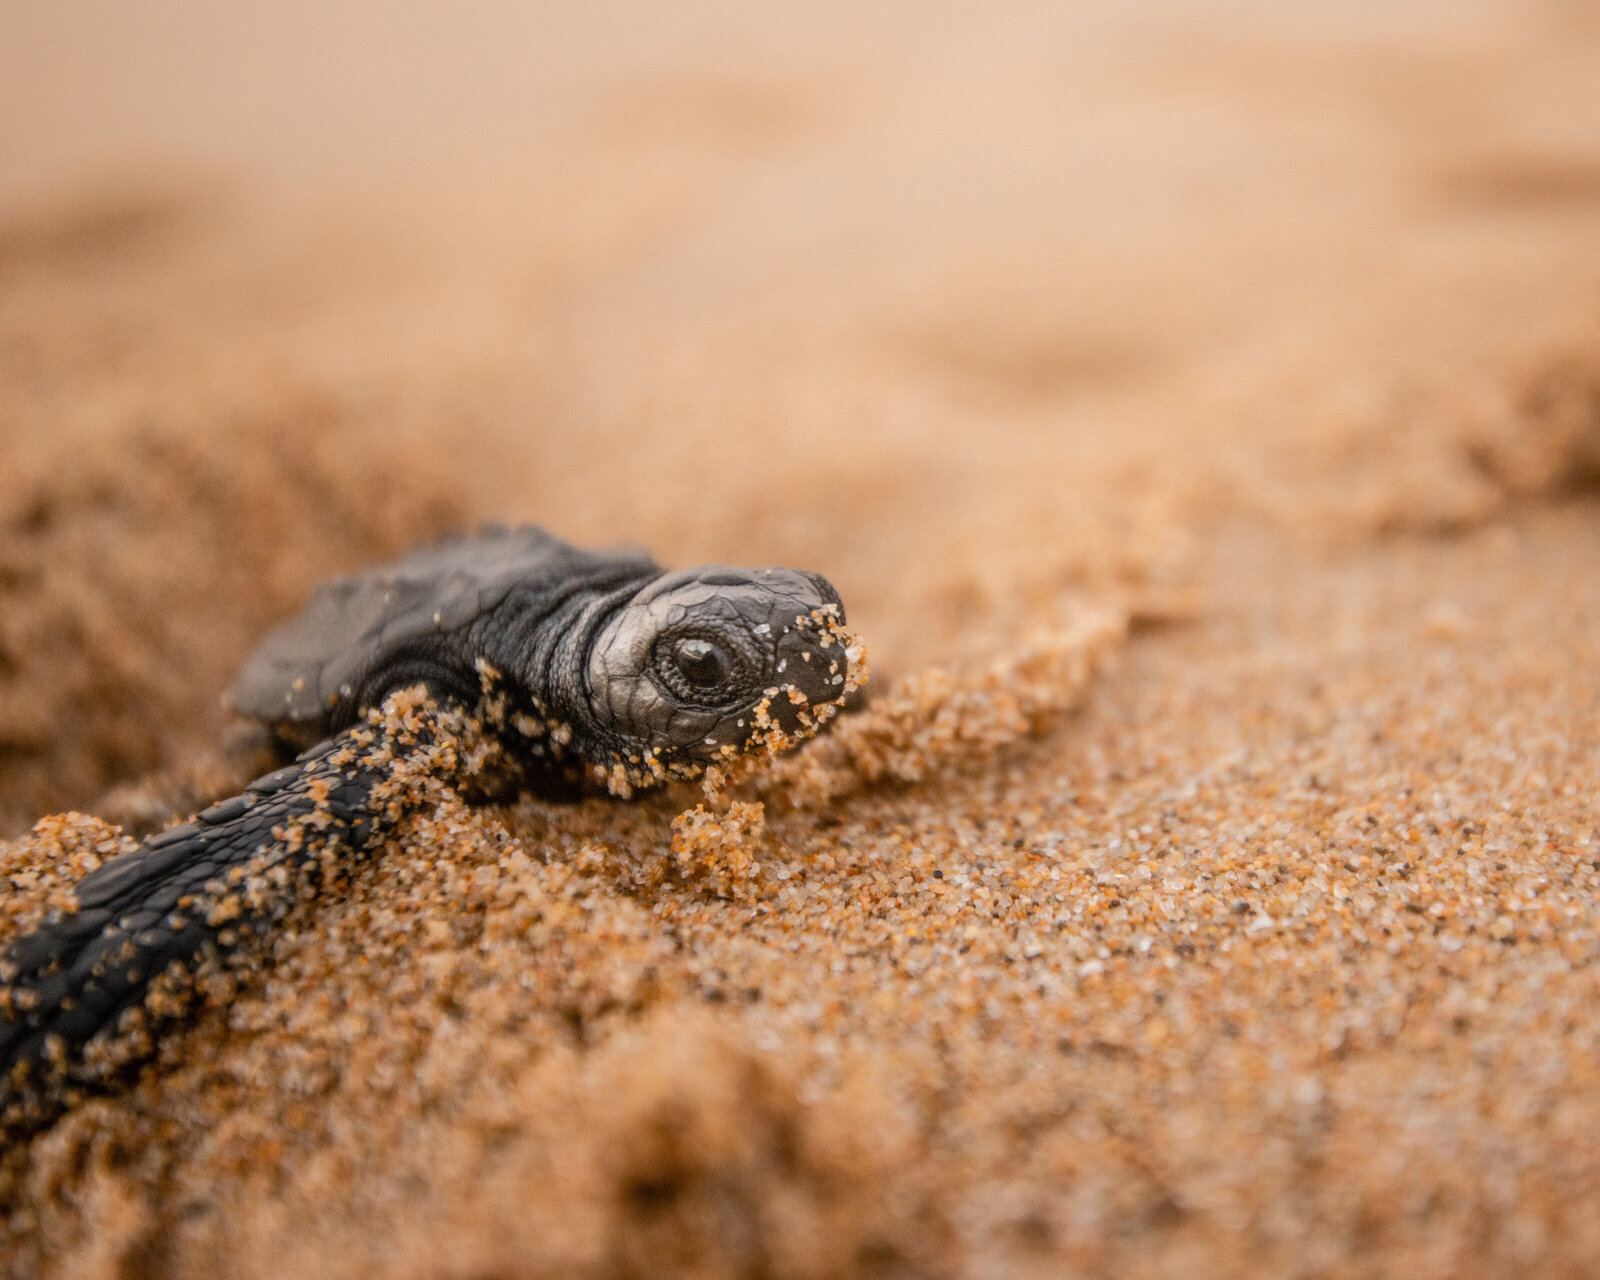 Photography-for-Adventure-Companies-Ecotourism-Careyes-Turtles--Brands-that-Impact--0899